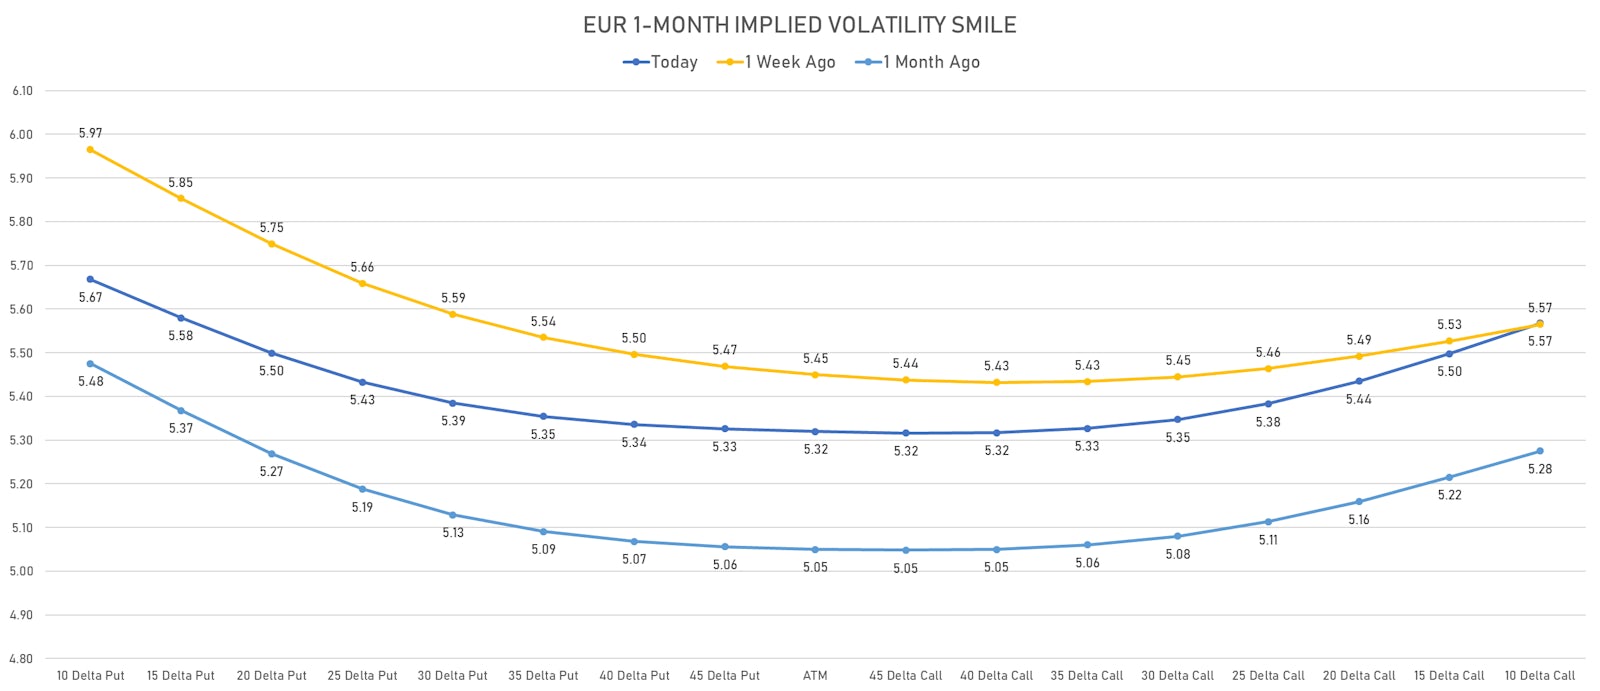 Negative Euro Speculative Interest Waned Over The Past Week | Sources: ϕpost, Refinitiv data 